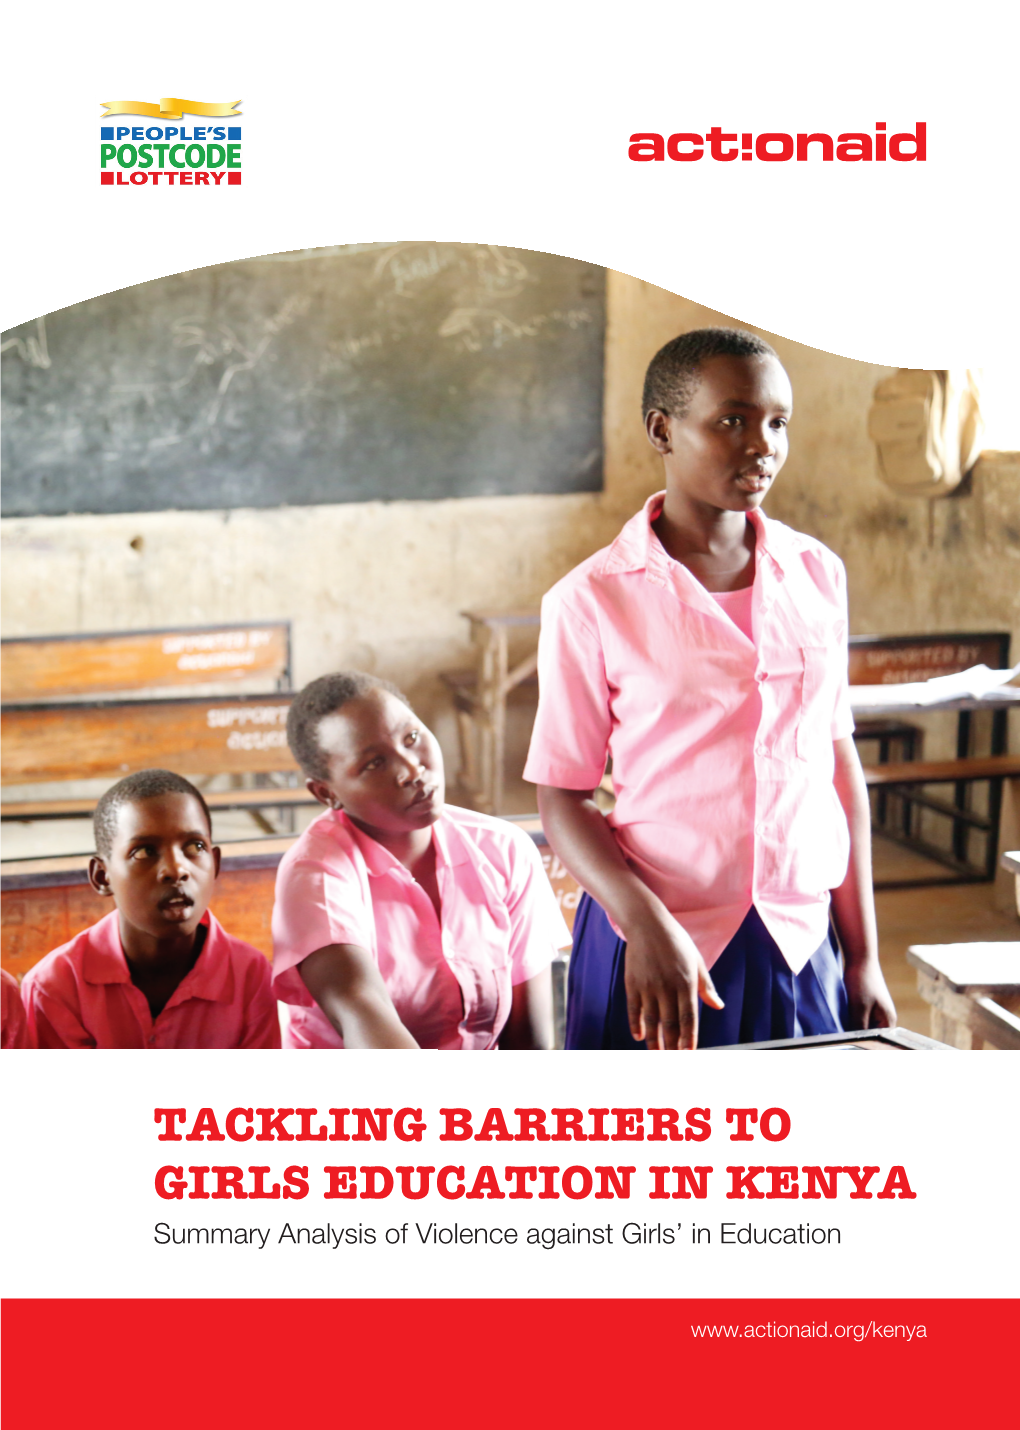 TACKLING BARRIERS to GIRLS EDUCATION in KENYA Summary Analysis of Violence Against Girls’ in Education